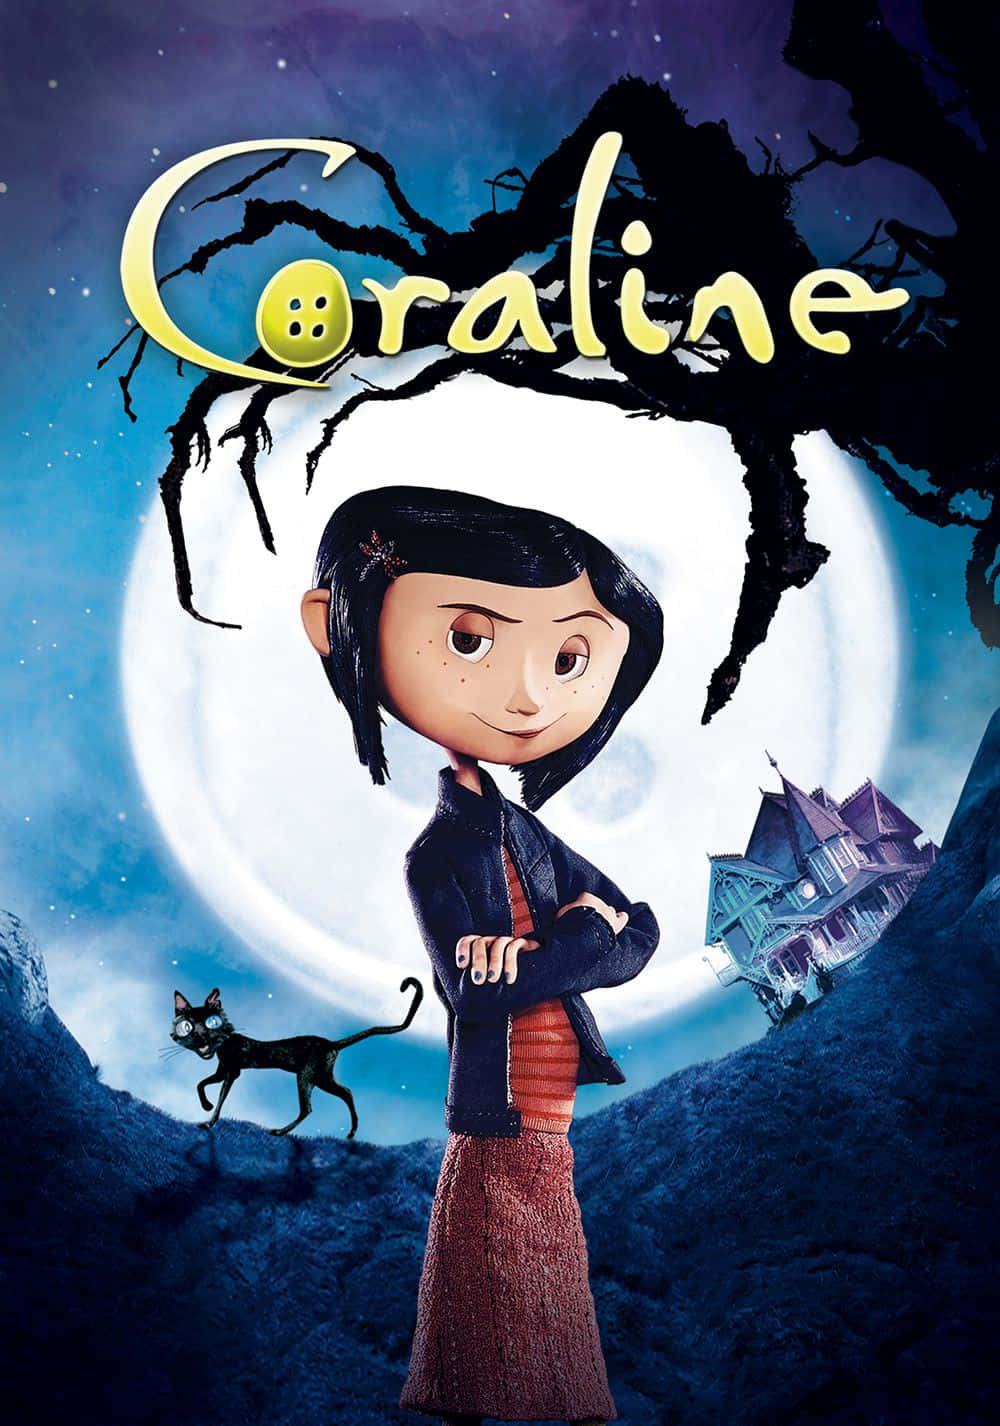 Embark on an adventure with Coraline